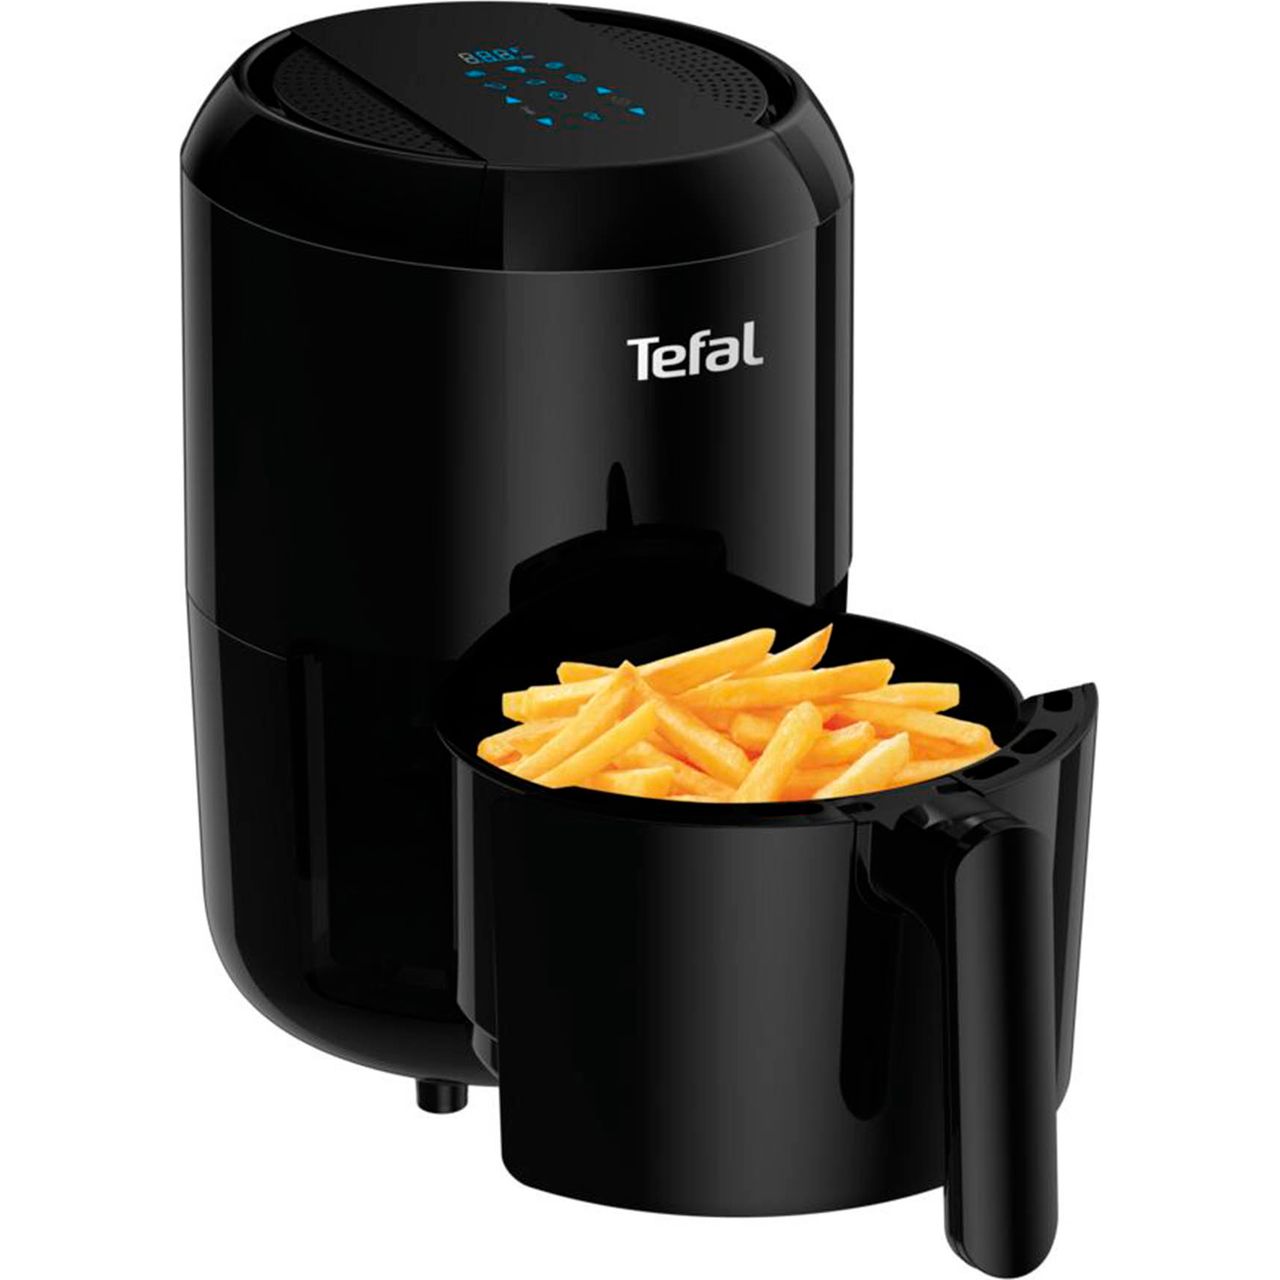 Tefal Easy Fry Compact EY301840 Air Fryer Review